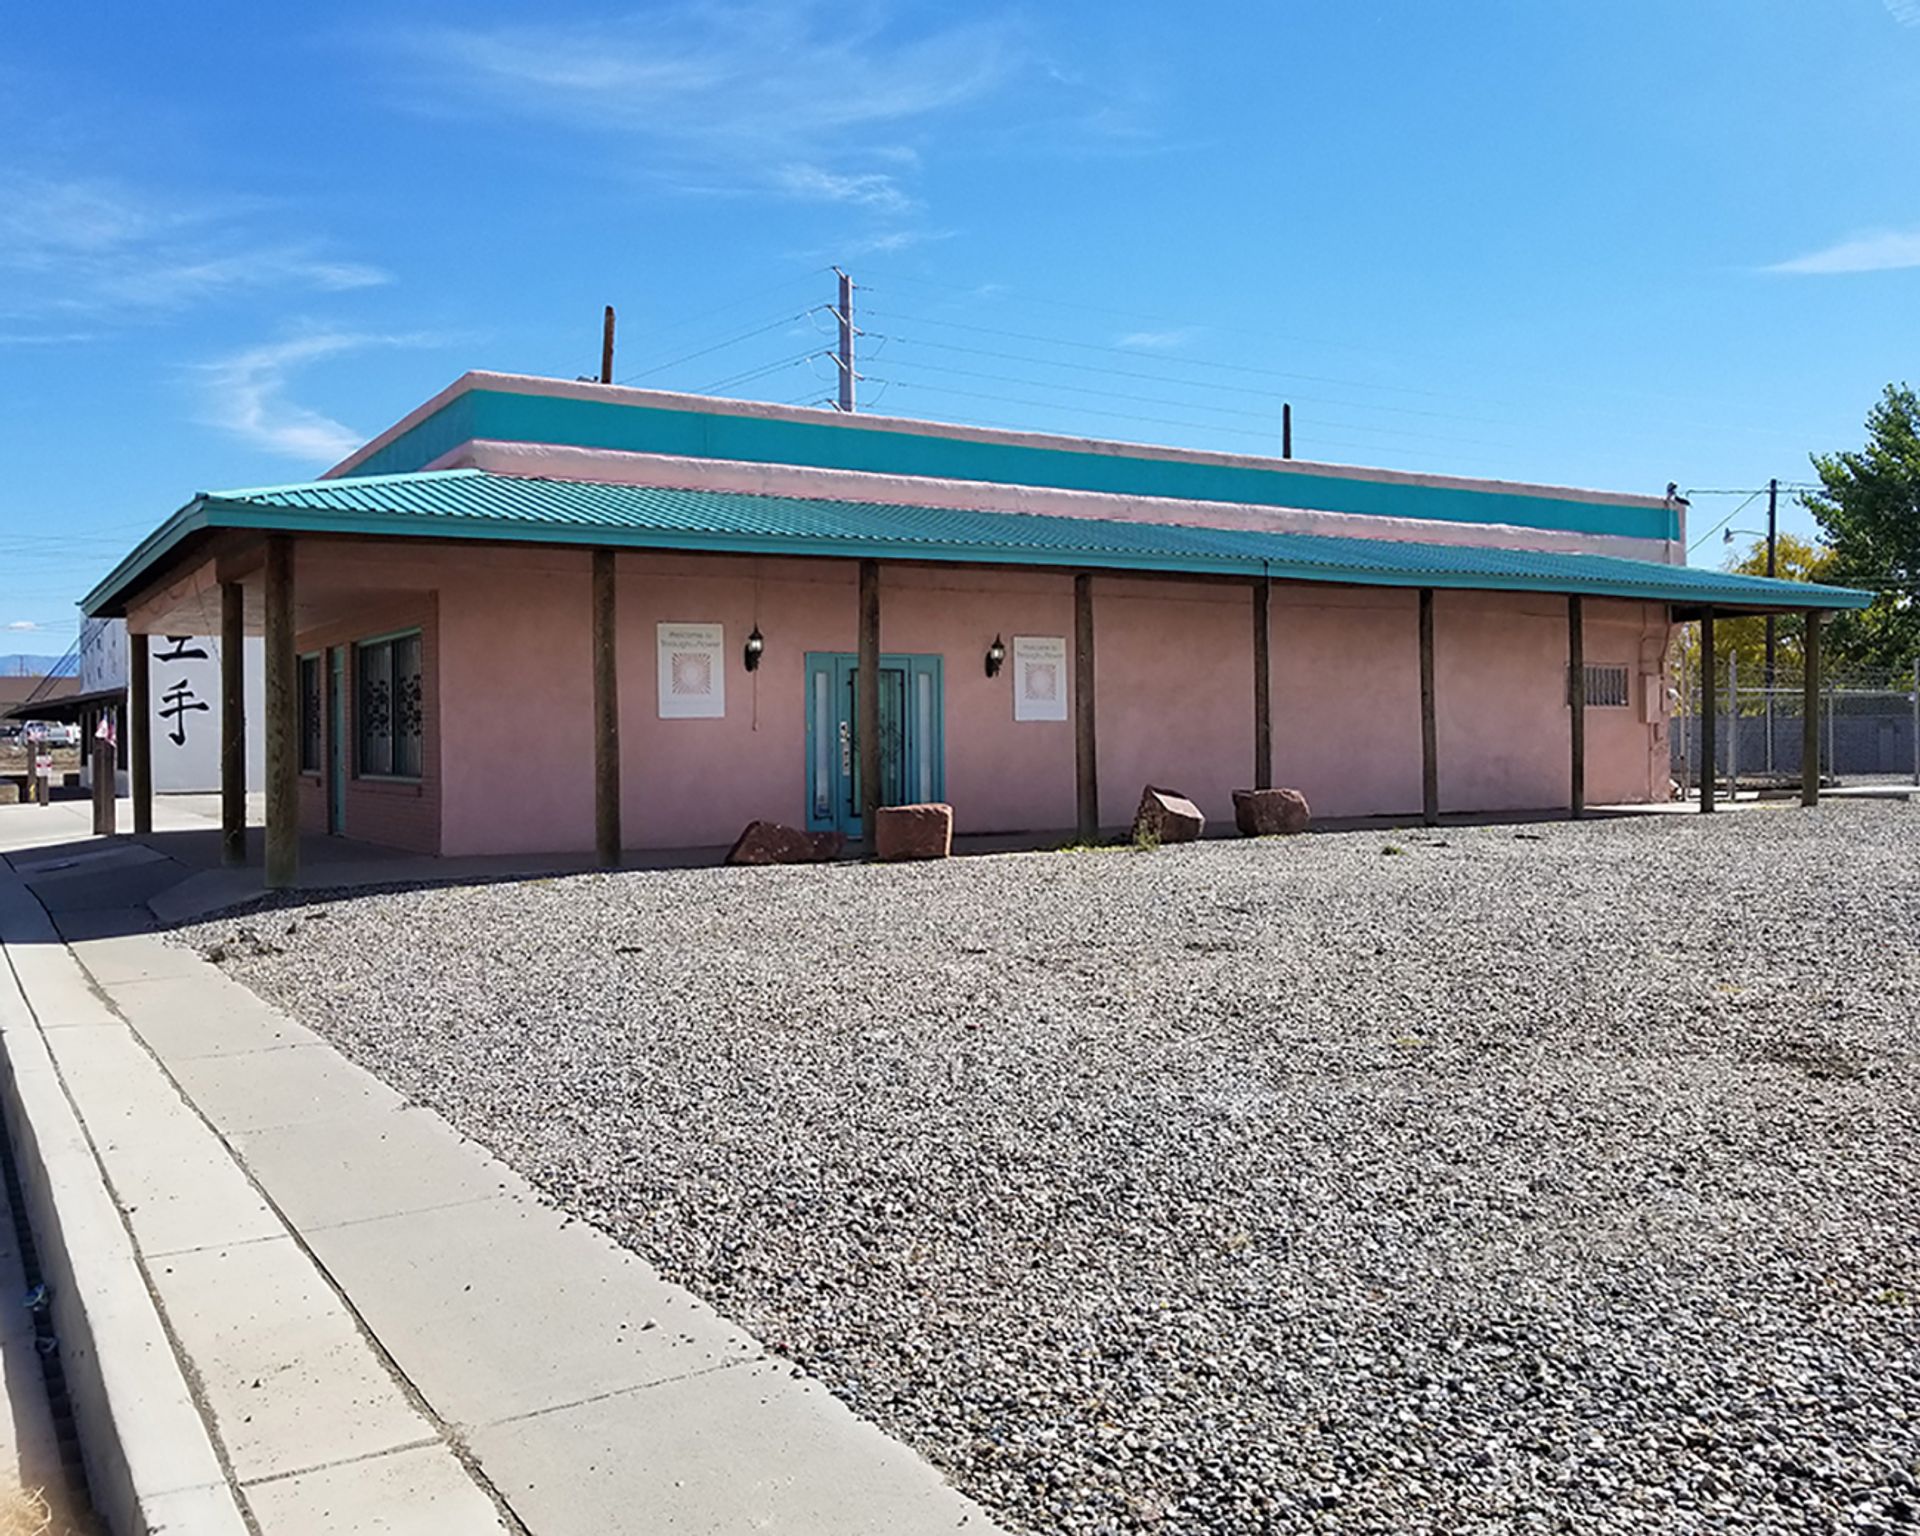 A building in Belen, New Mexico where a Judy Chicago museum was proposed Courtesy of Through the Flower